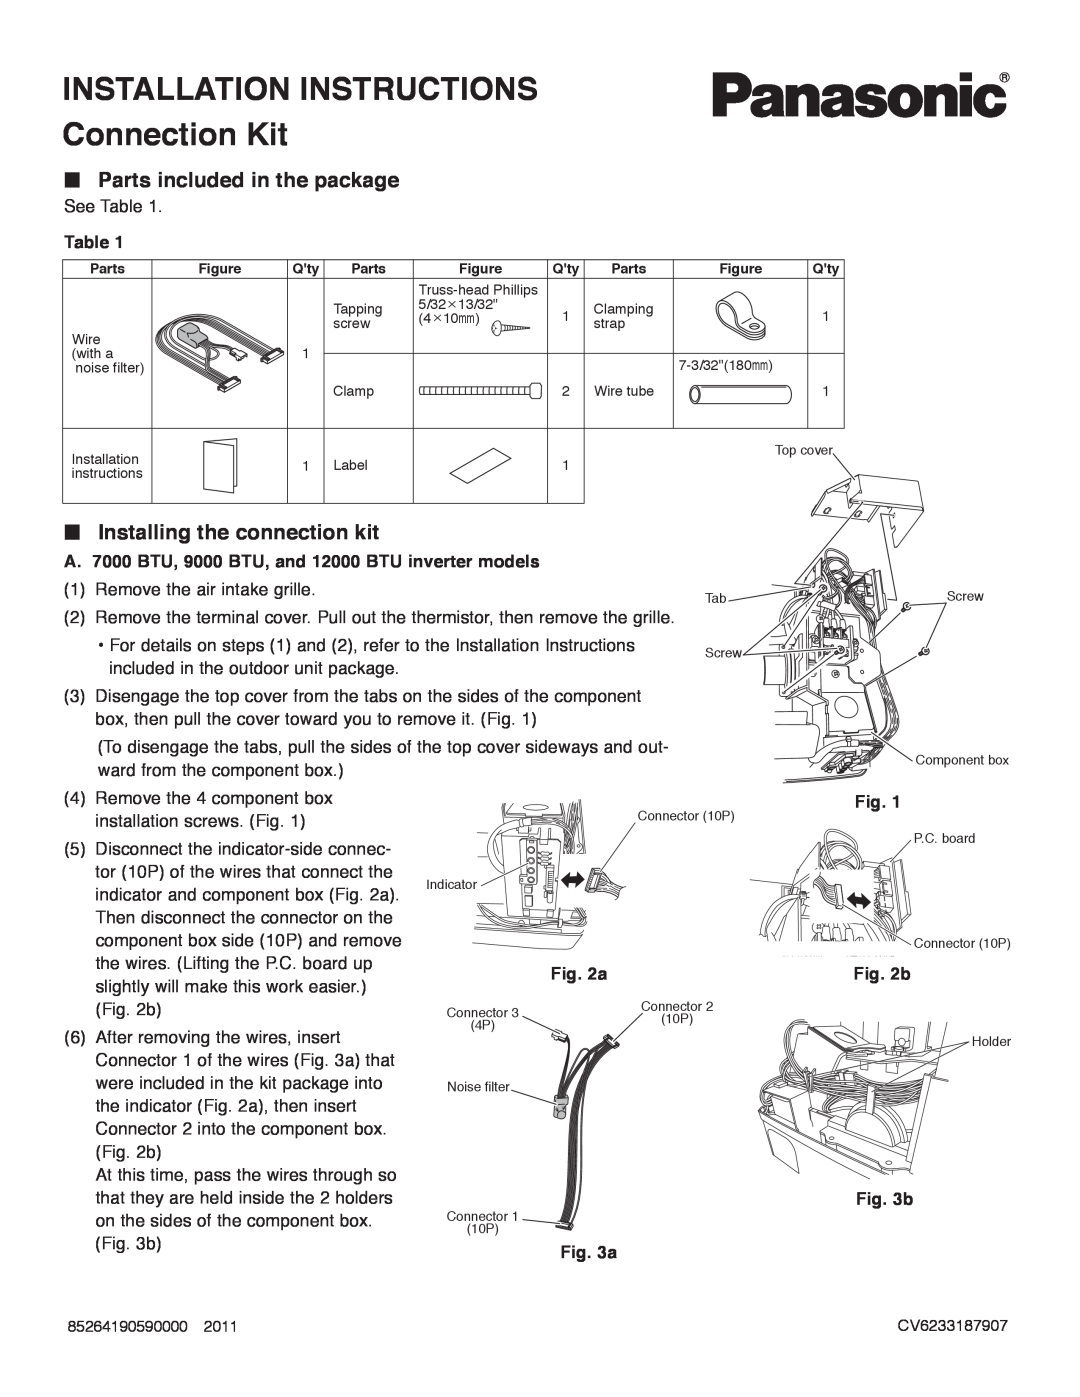 Panasonic CZ-RD515U INSTALLATION INSTRUCTIONS Connection Kit, Parts included in the package, Installing the connection kit 